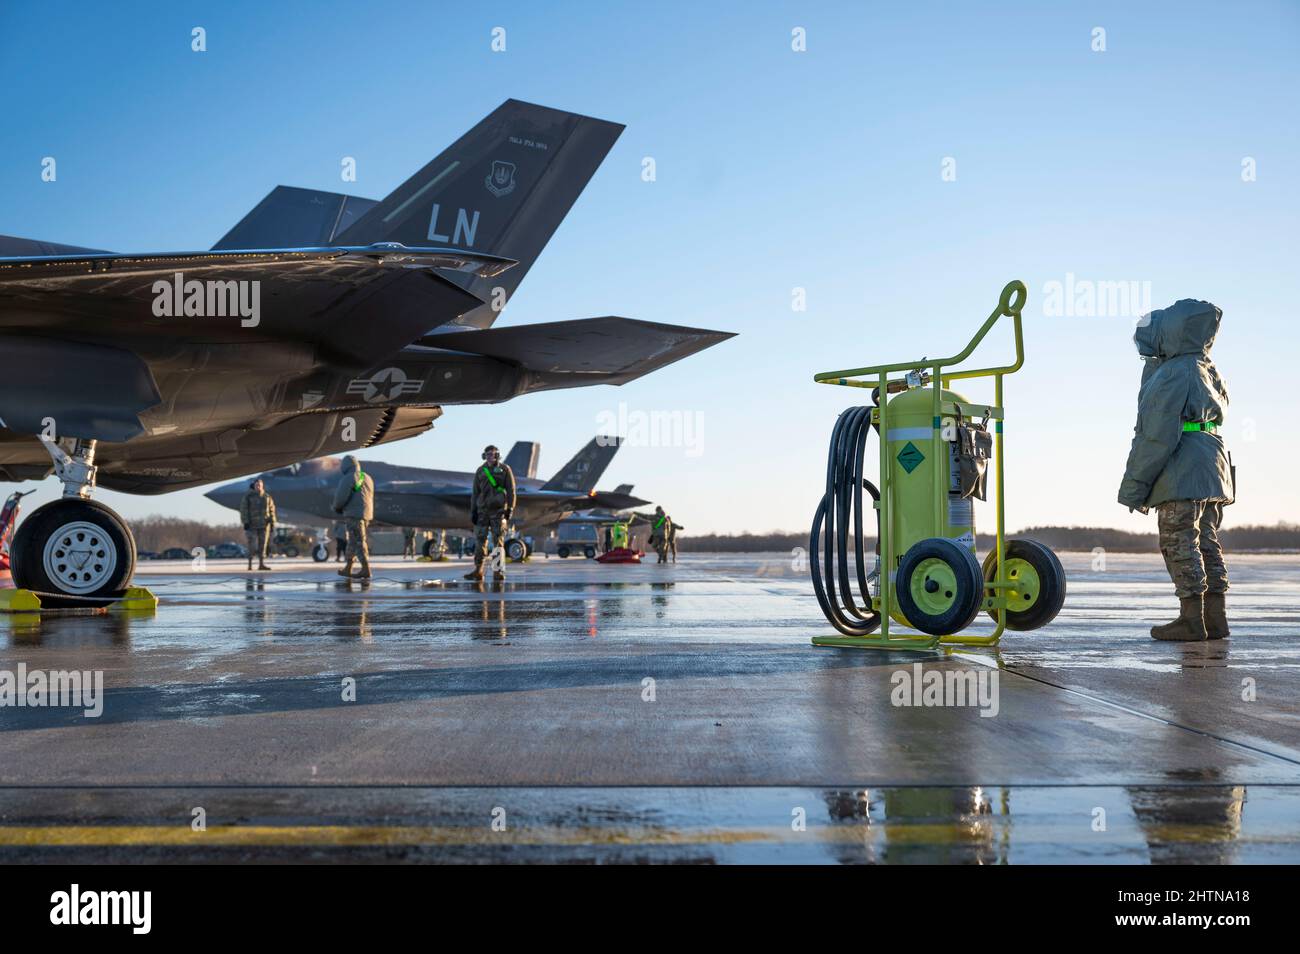 U.S. Air Force Airmen assigned to the 748th Aircraft Maintenance Squadron prepare an F-35 Lightning II aircraft assigned to the 48th Fighter Wing for take-off at Ämari Air Base, Estonia, March 1, 2022. Members of the 48th FW forward deployed to Ämari AB to support NATO’s collective defense and enhanced Air Policing mission. (U.S. Air Force photo by Staff Sgt. Megan M. Beatty) Stock Photo